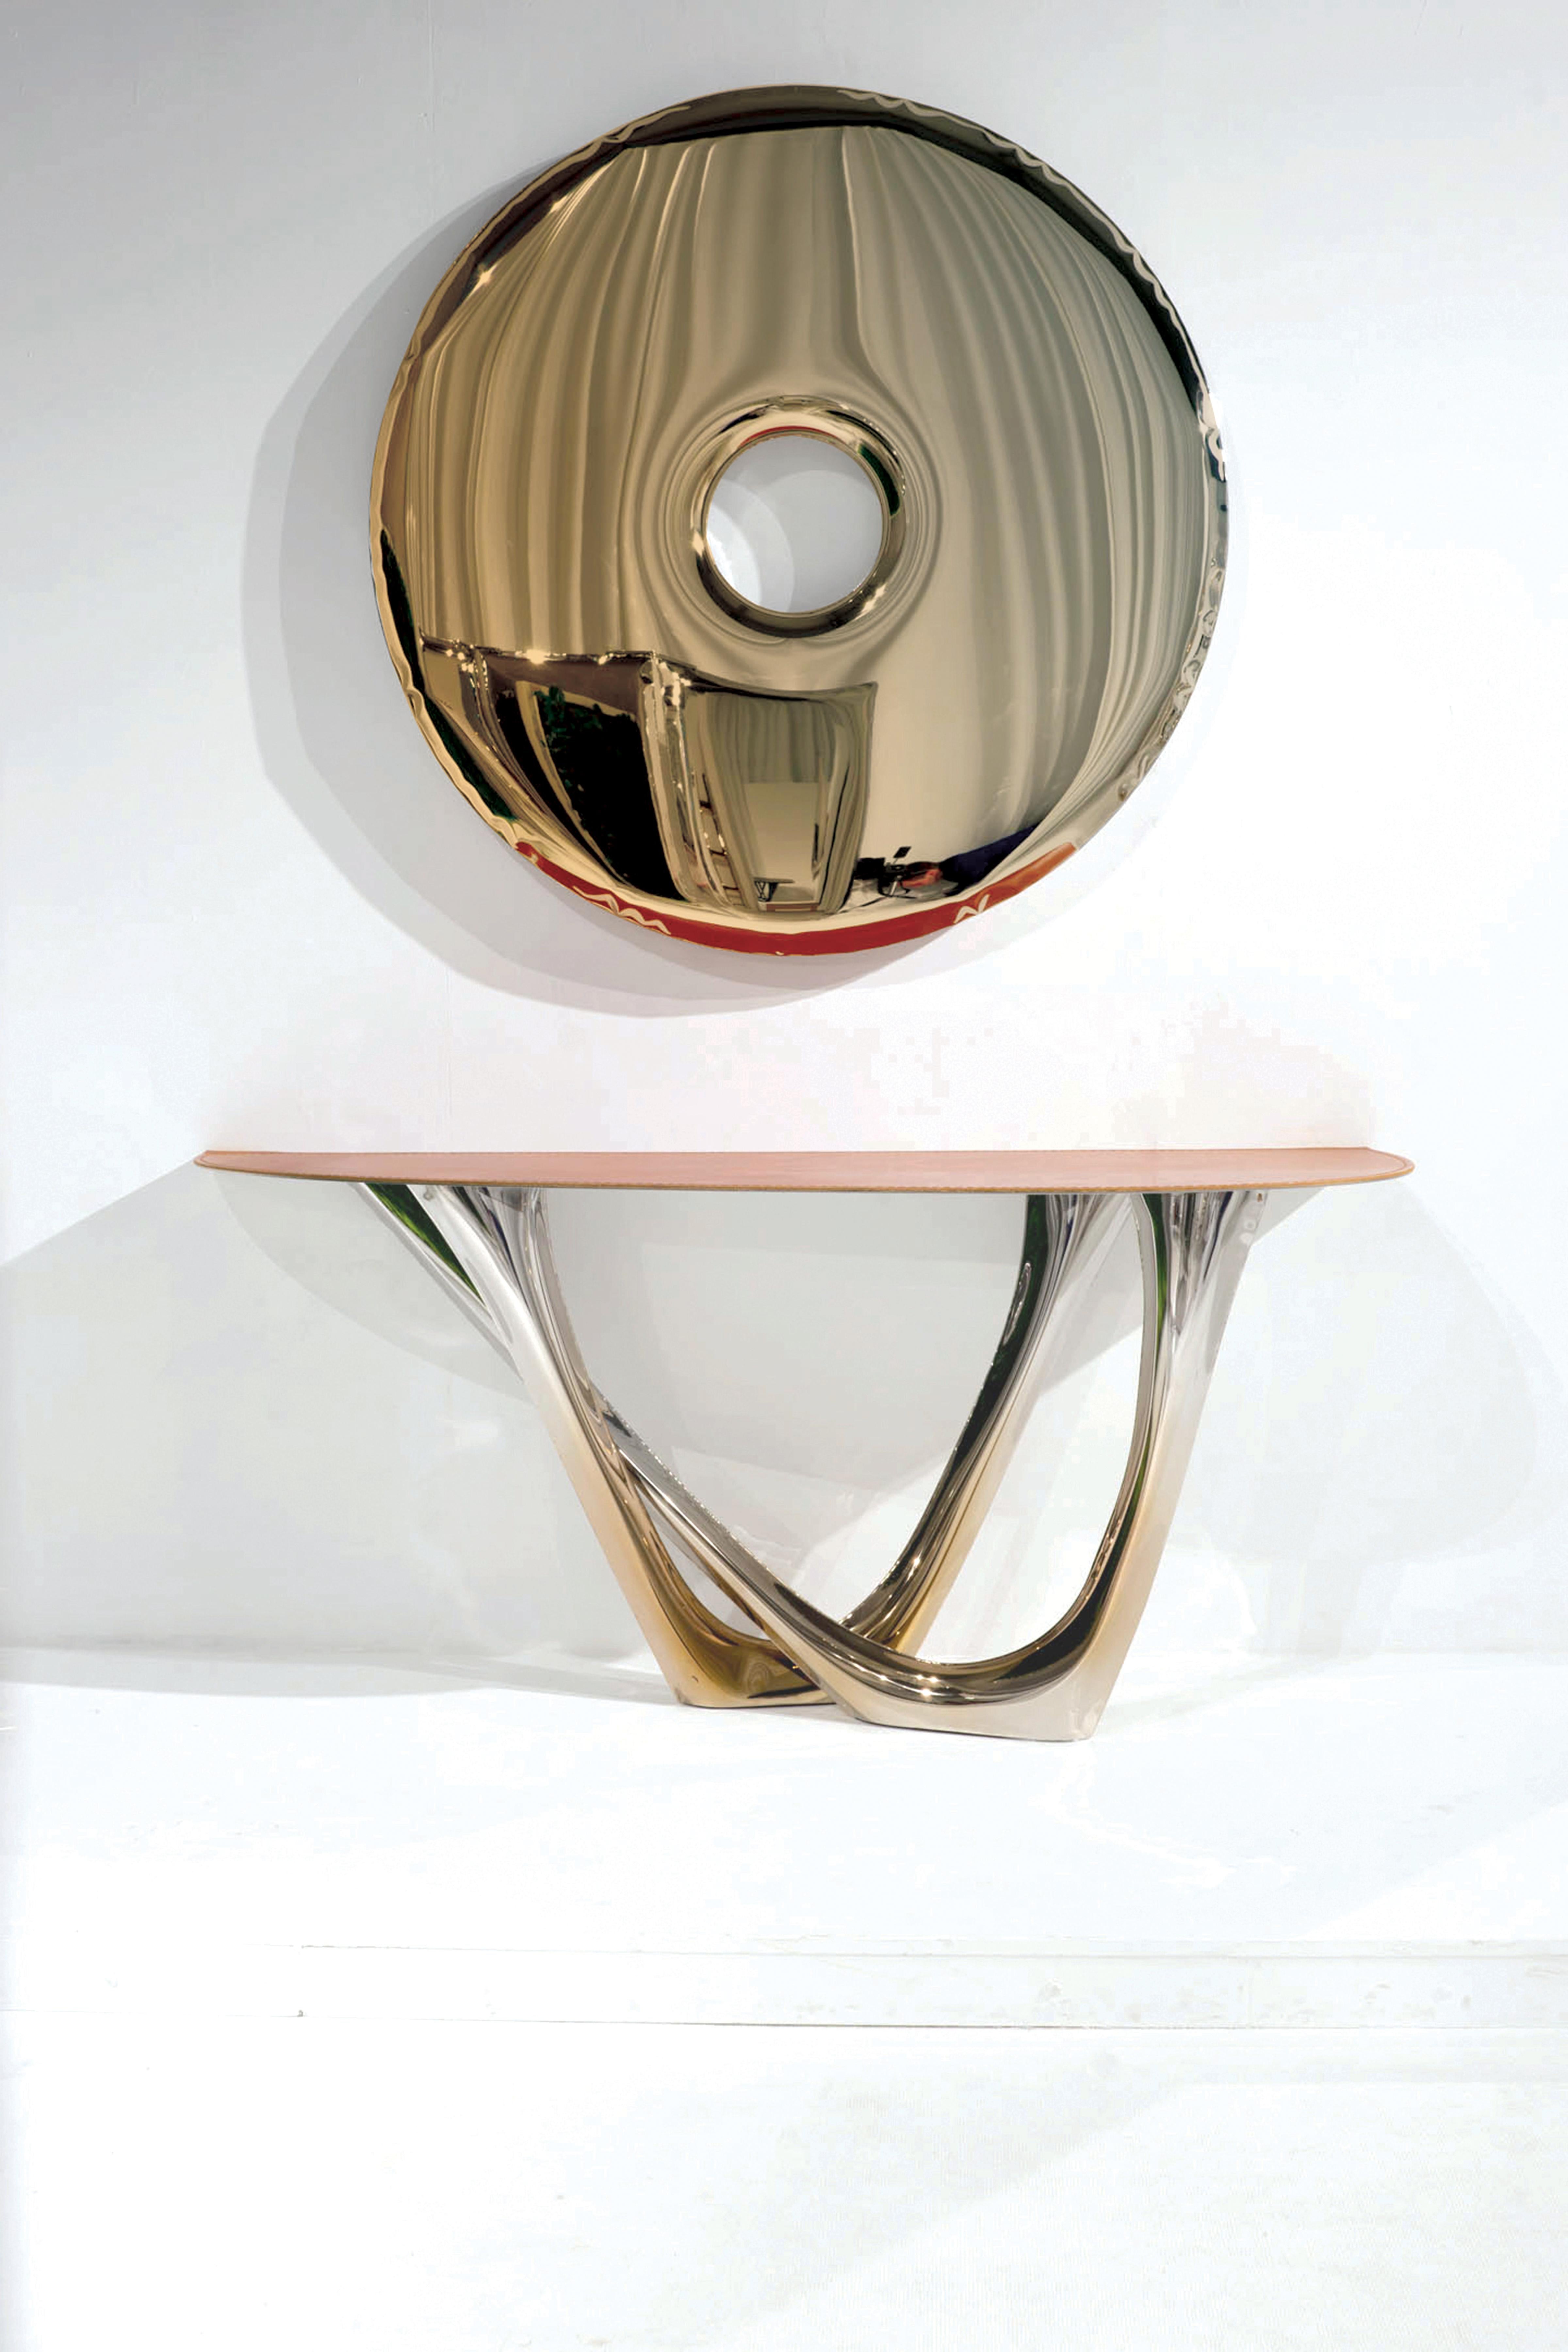 The rondo mirror is made of stainless steel polished to high gloss. Its polished surface is perfectly reflecting the light and other objects placed in the same room or hall. Large scale convexities that appear on the surface of the mirror are